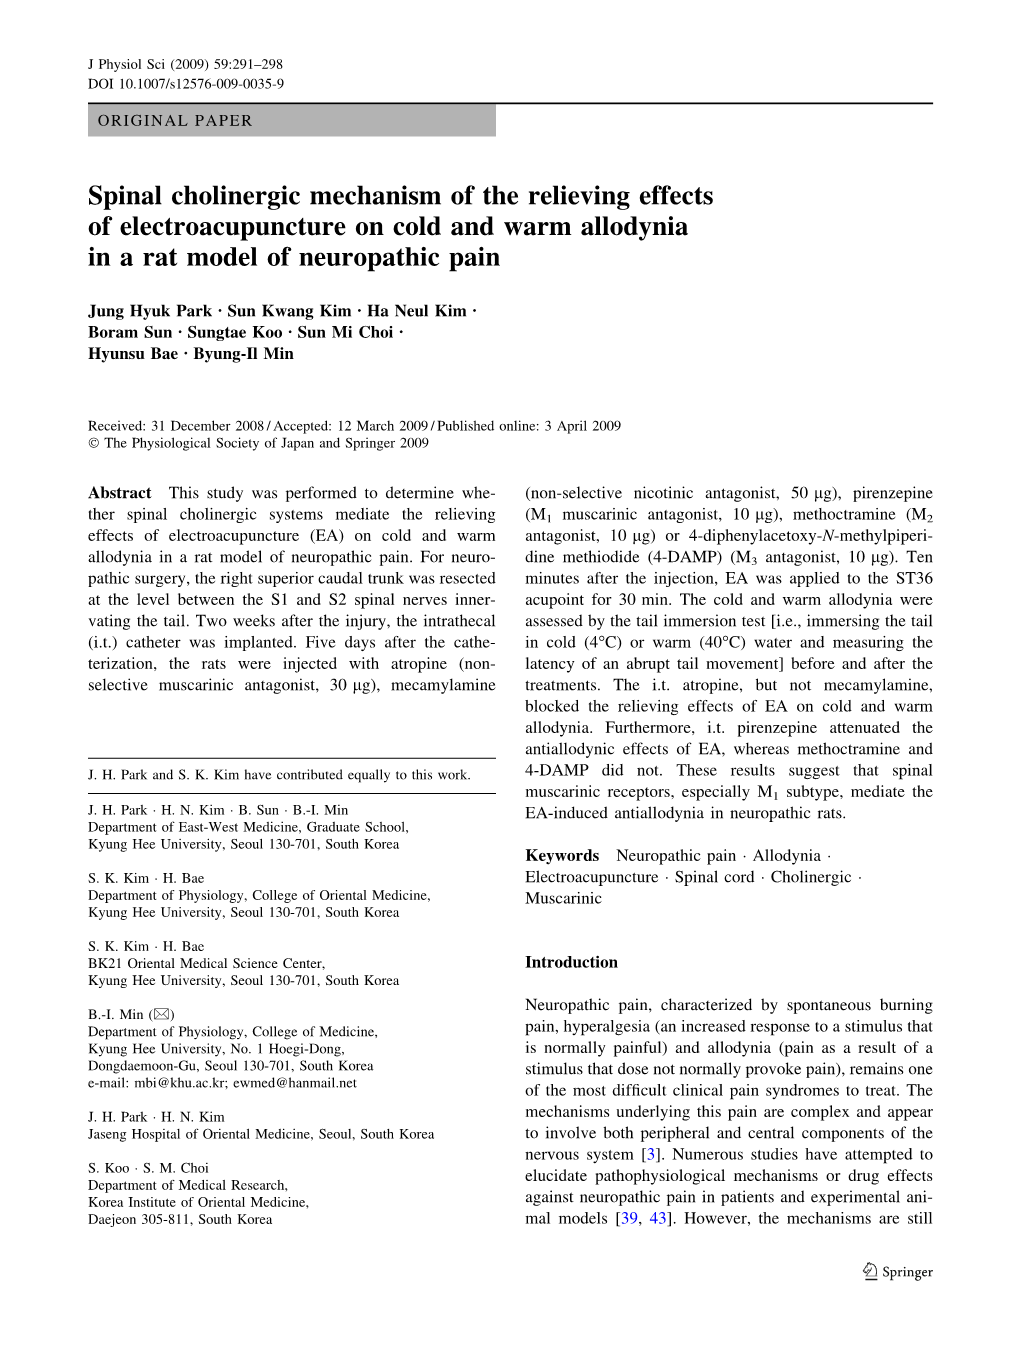 Spinal Cholinergic Mechanism of the Relieving Effects of Electroacupuncture on Cold and Warm Allodynia in a Rat Model of Neuropathic Pain